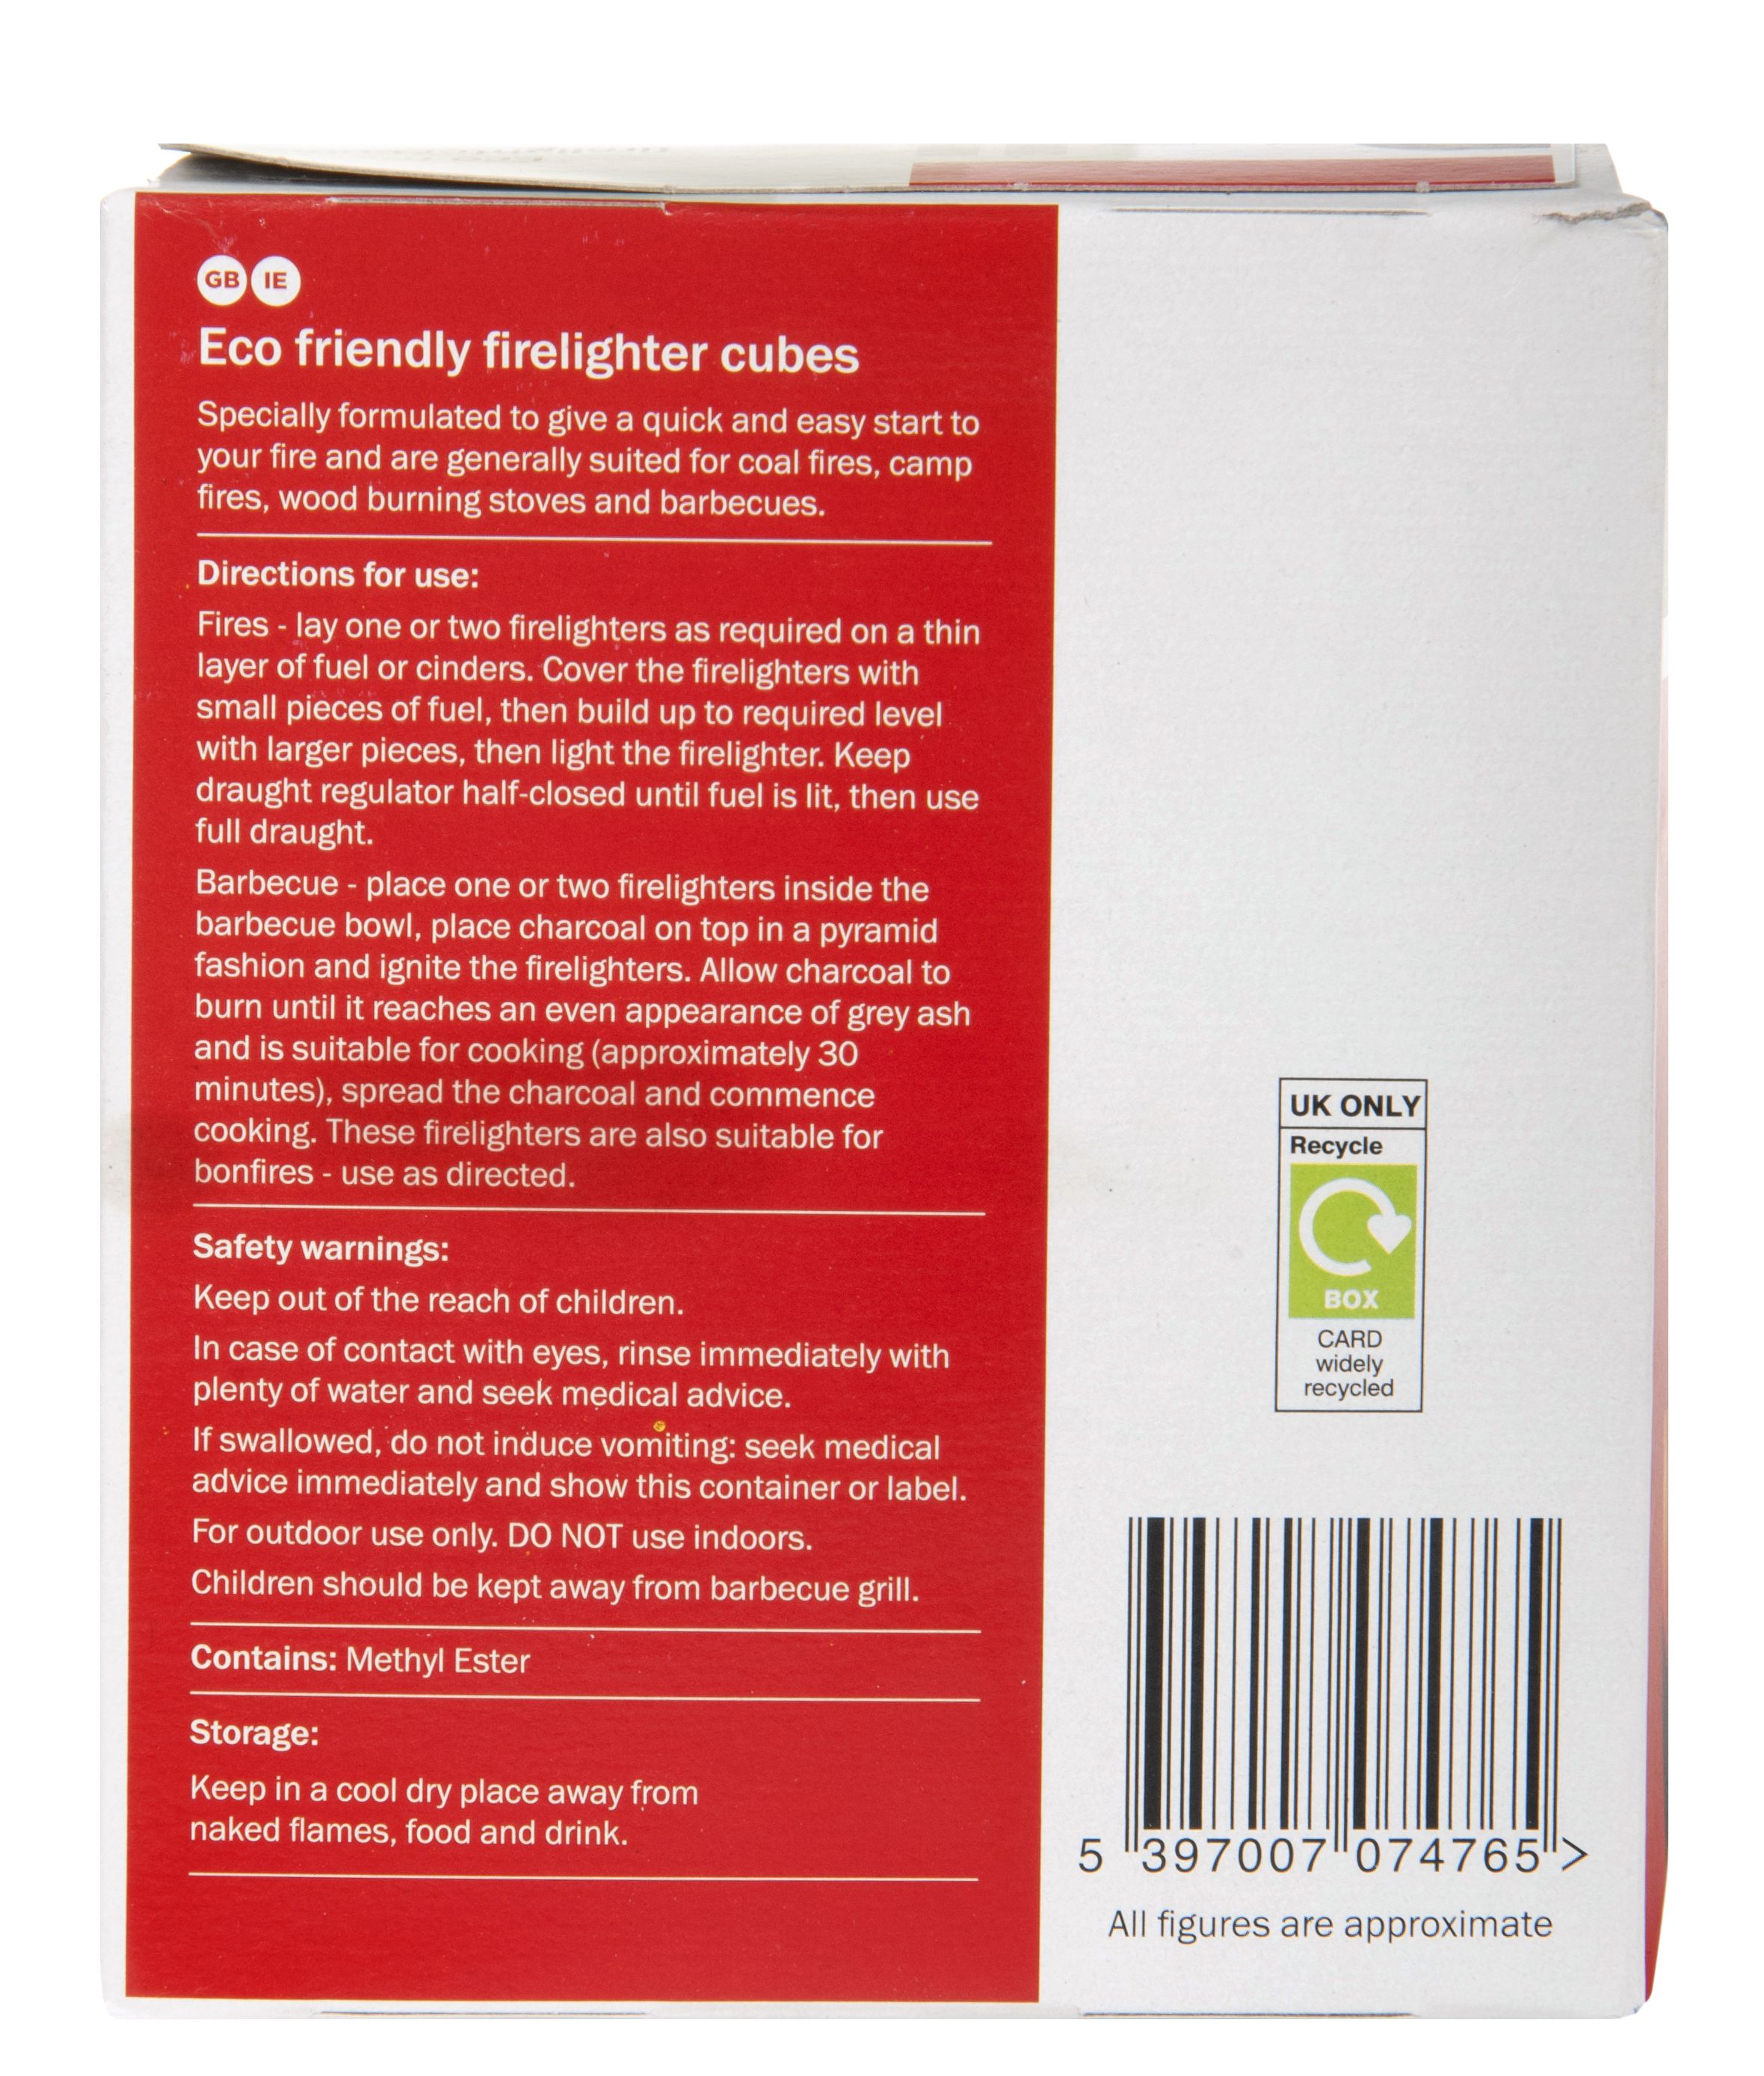 Diall Firelighters Pack of 18